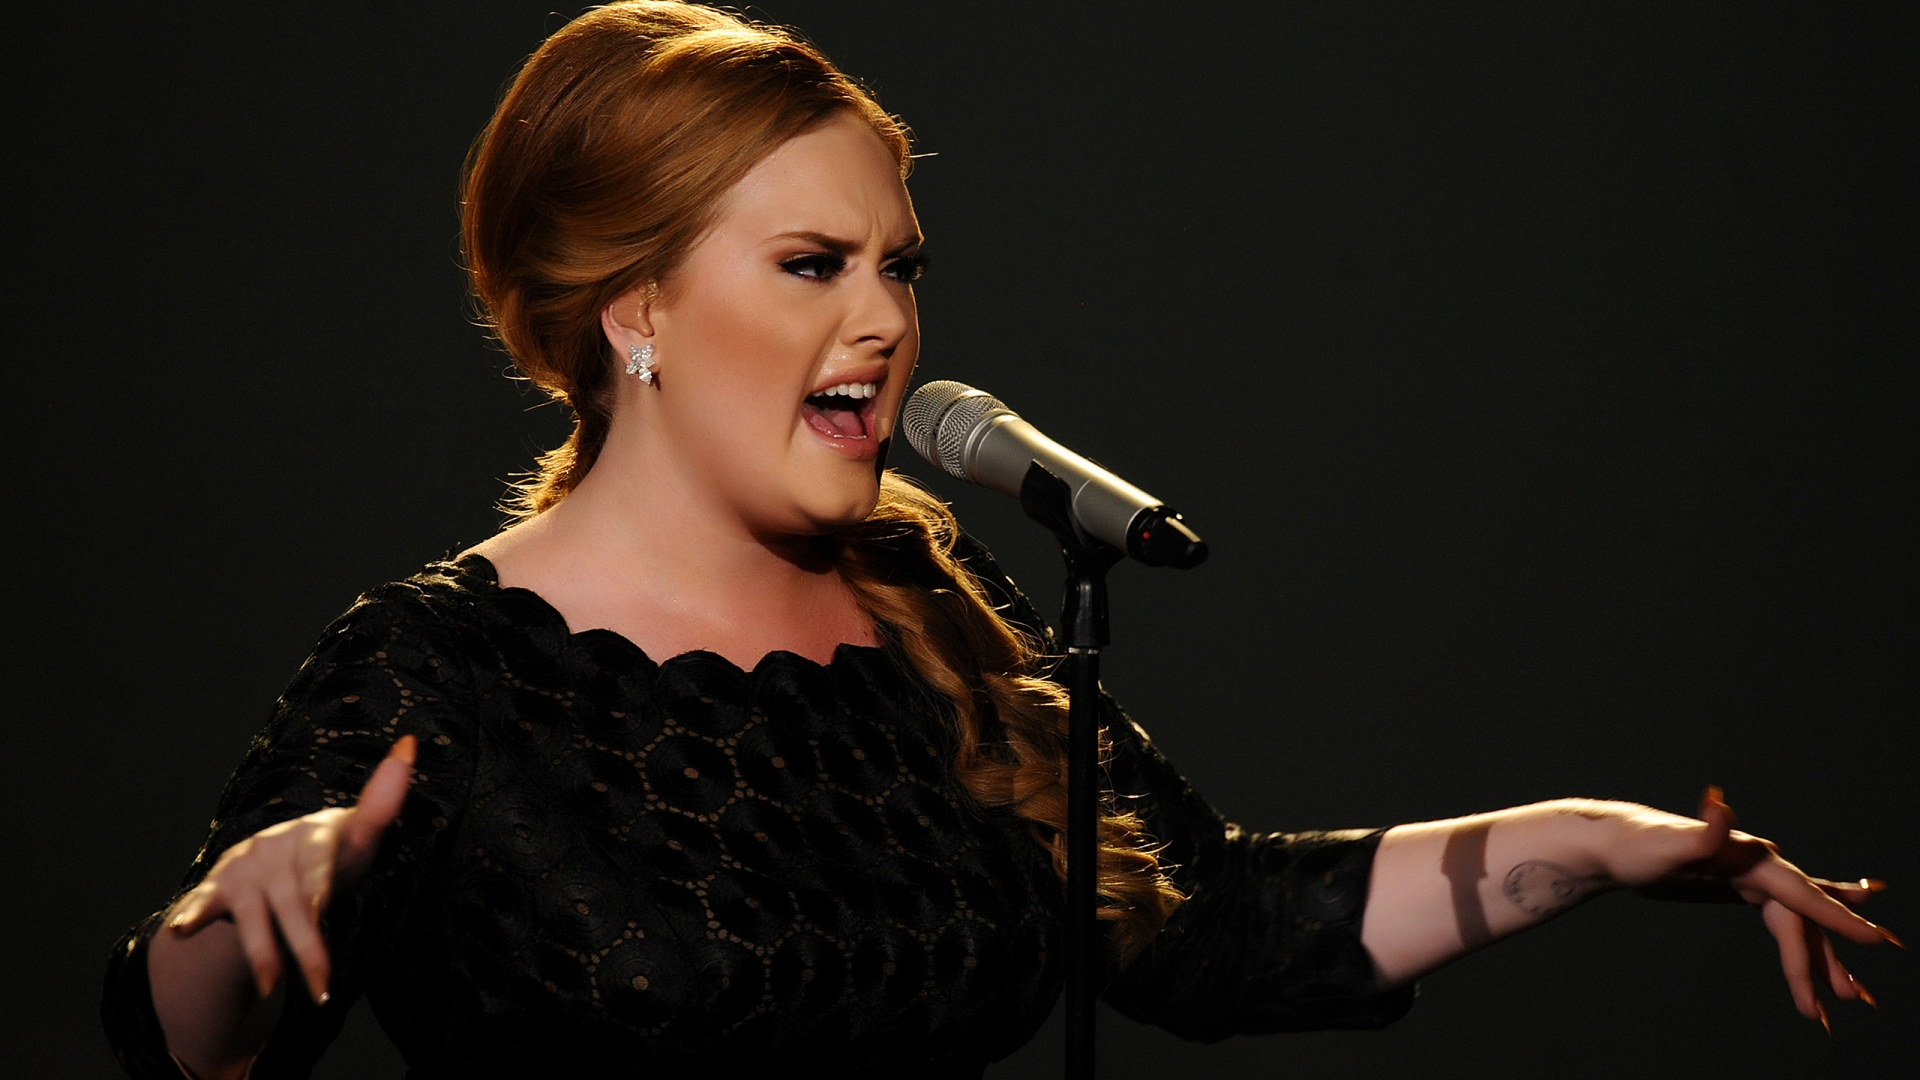 Adele Performing for 1920 x 1080 HDTV 1080p resolution